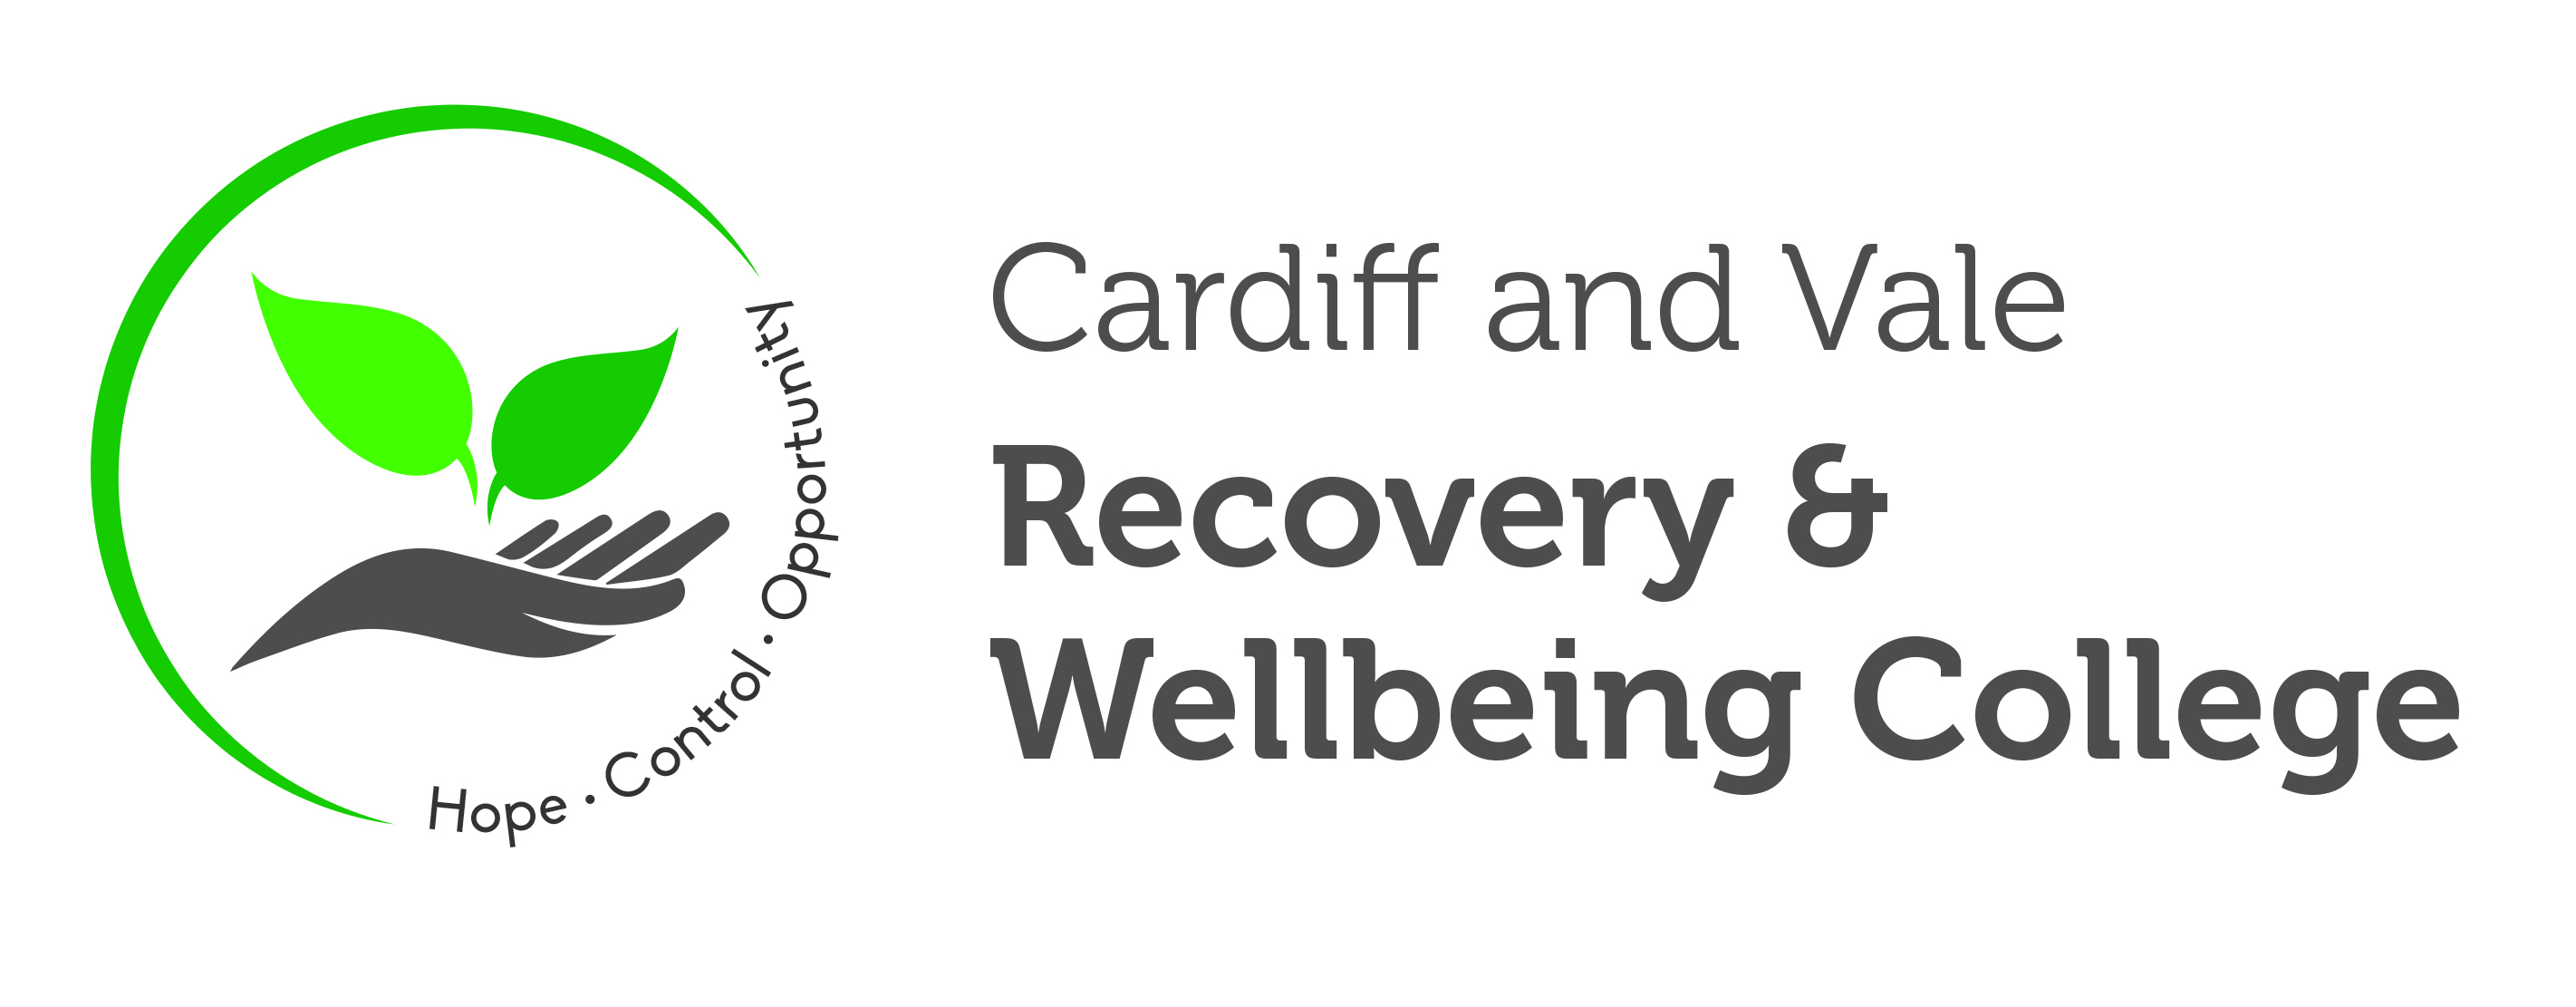 Cardiff and Vale Recovery and Wellbeing College - Hope, Control, Opportunity